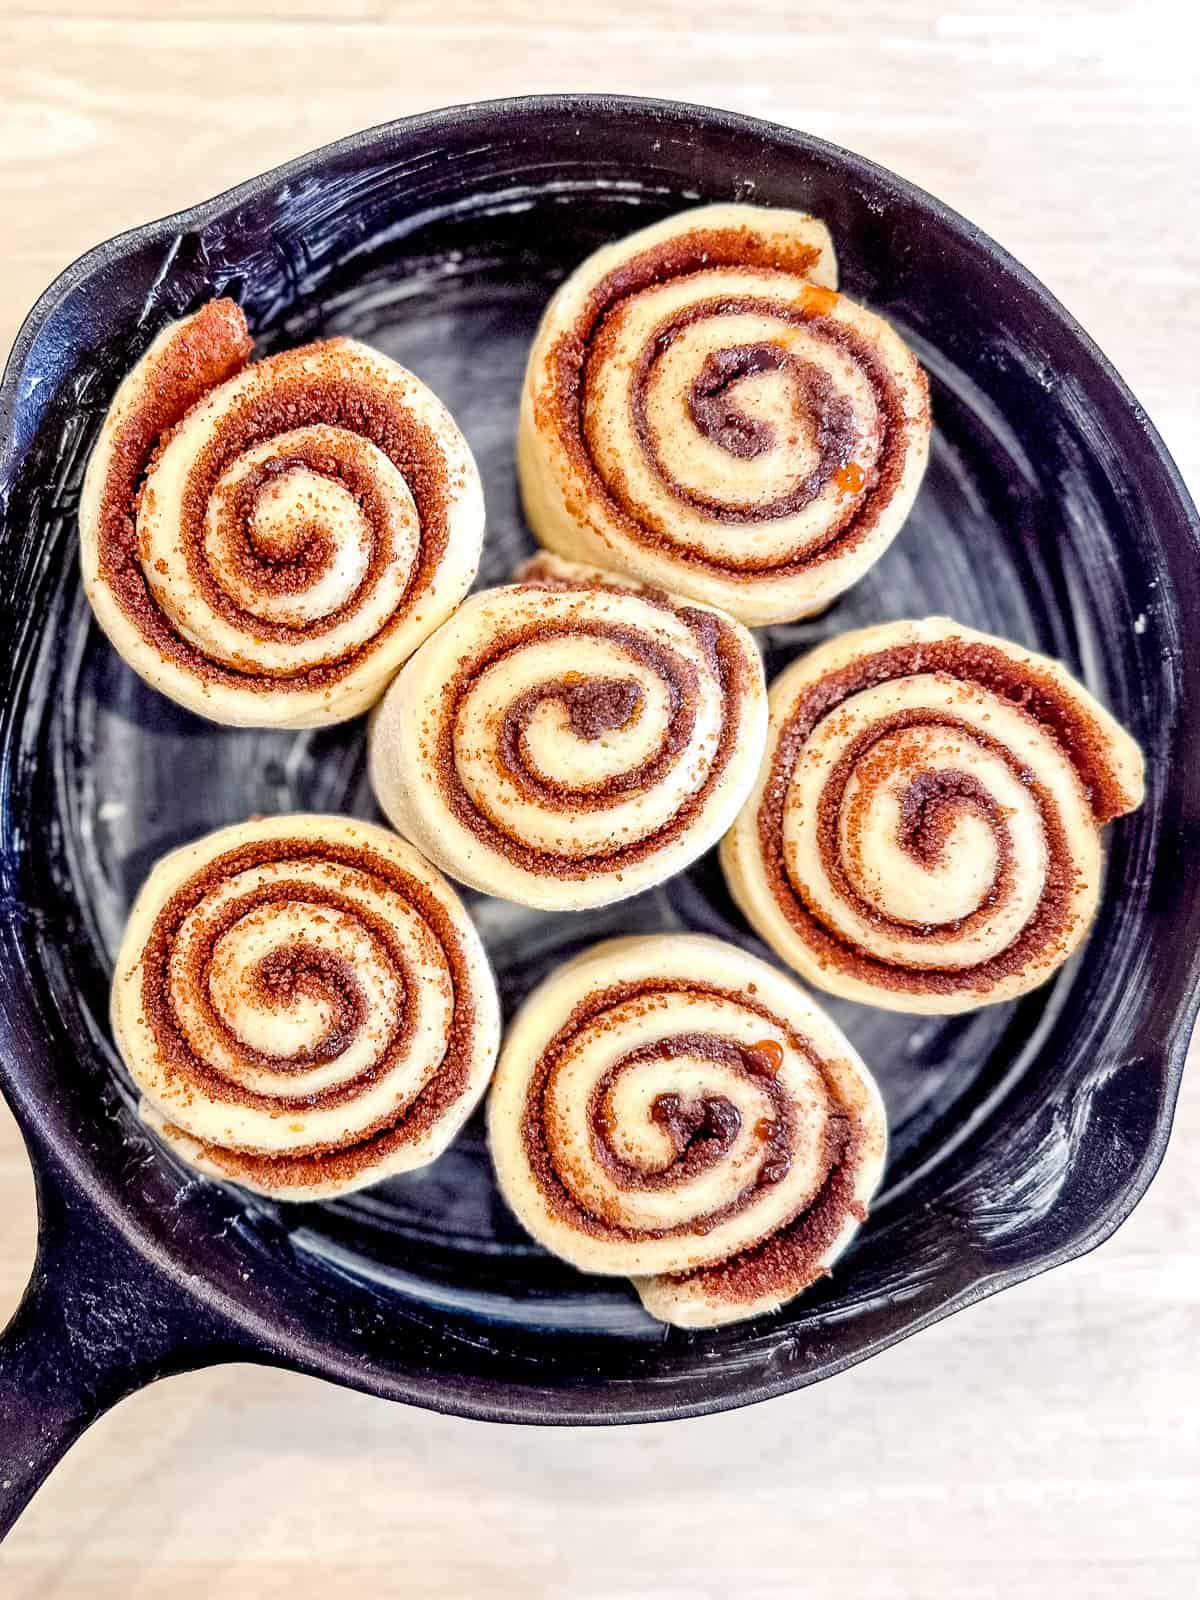 Cut cinnamon rolls in a cast iron pan after rising overnight.